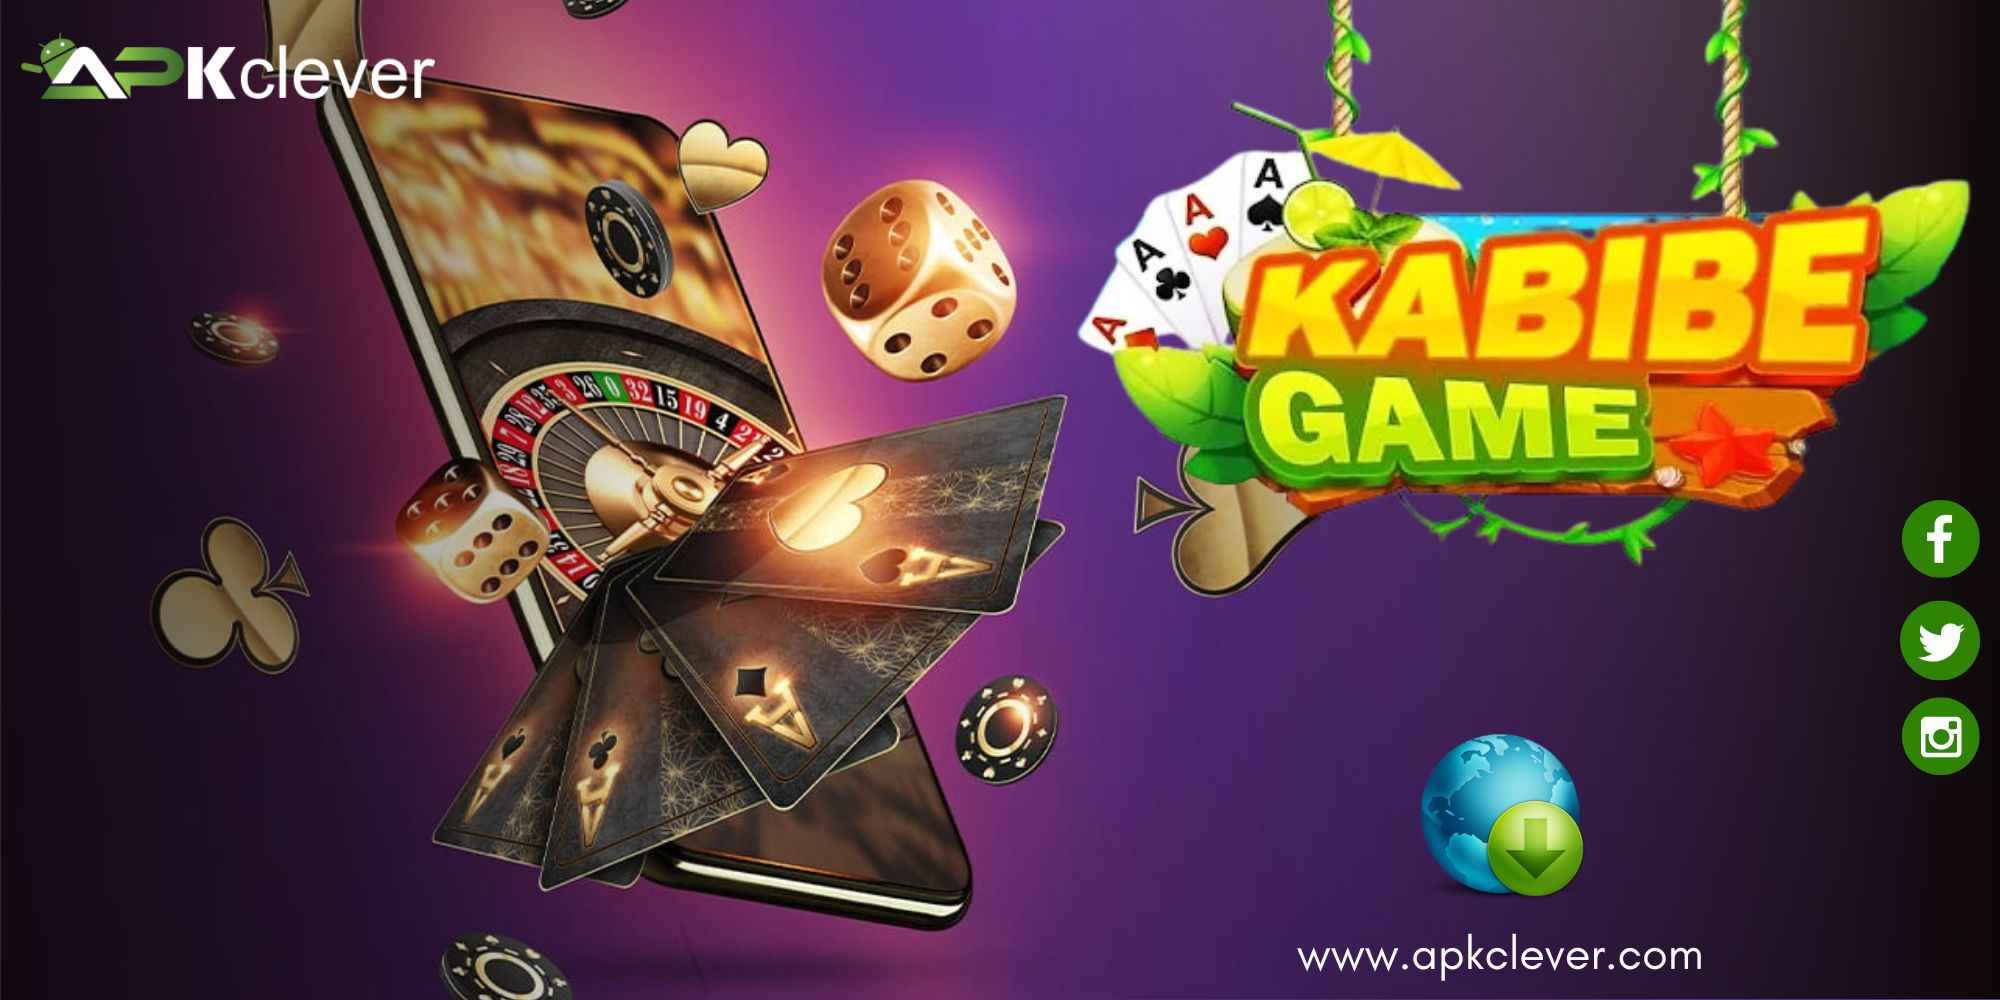 Karinka Game APK Download [Latest Version] For Android